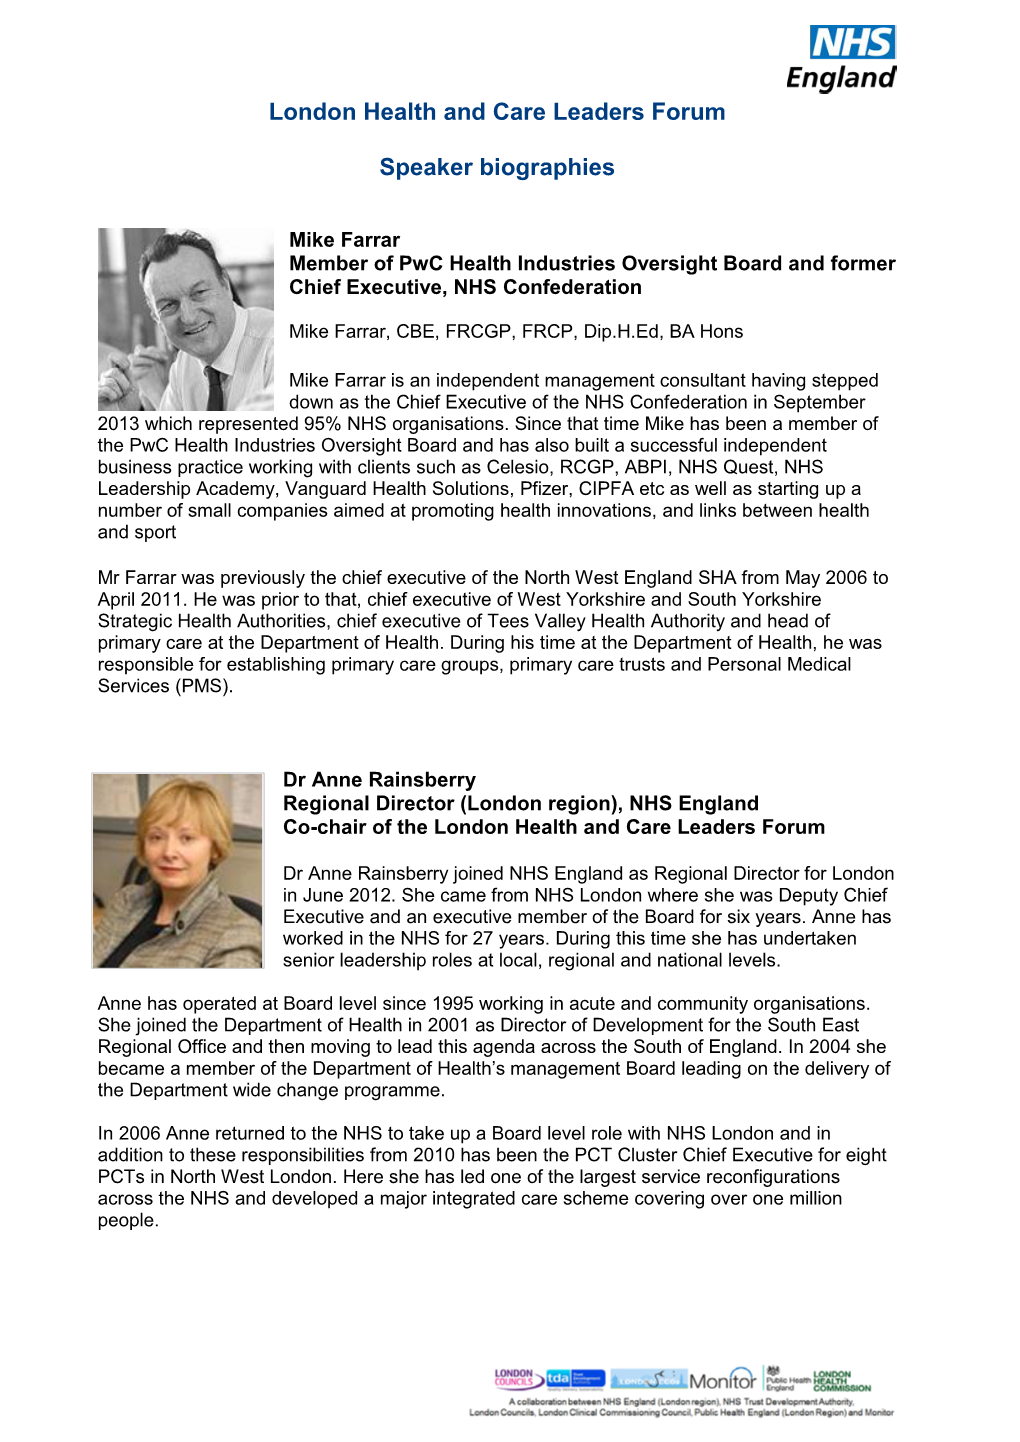 London Health and Care Leaders Forum Speaker Biographies